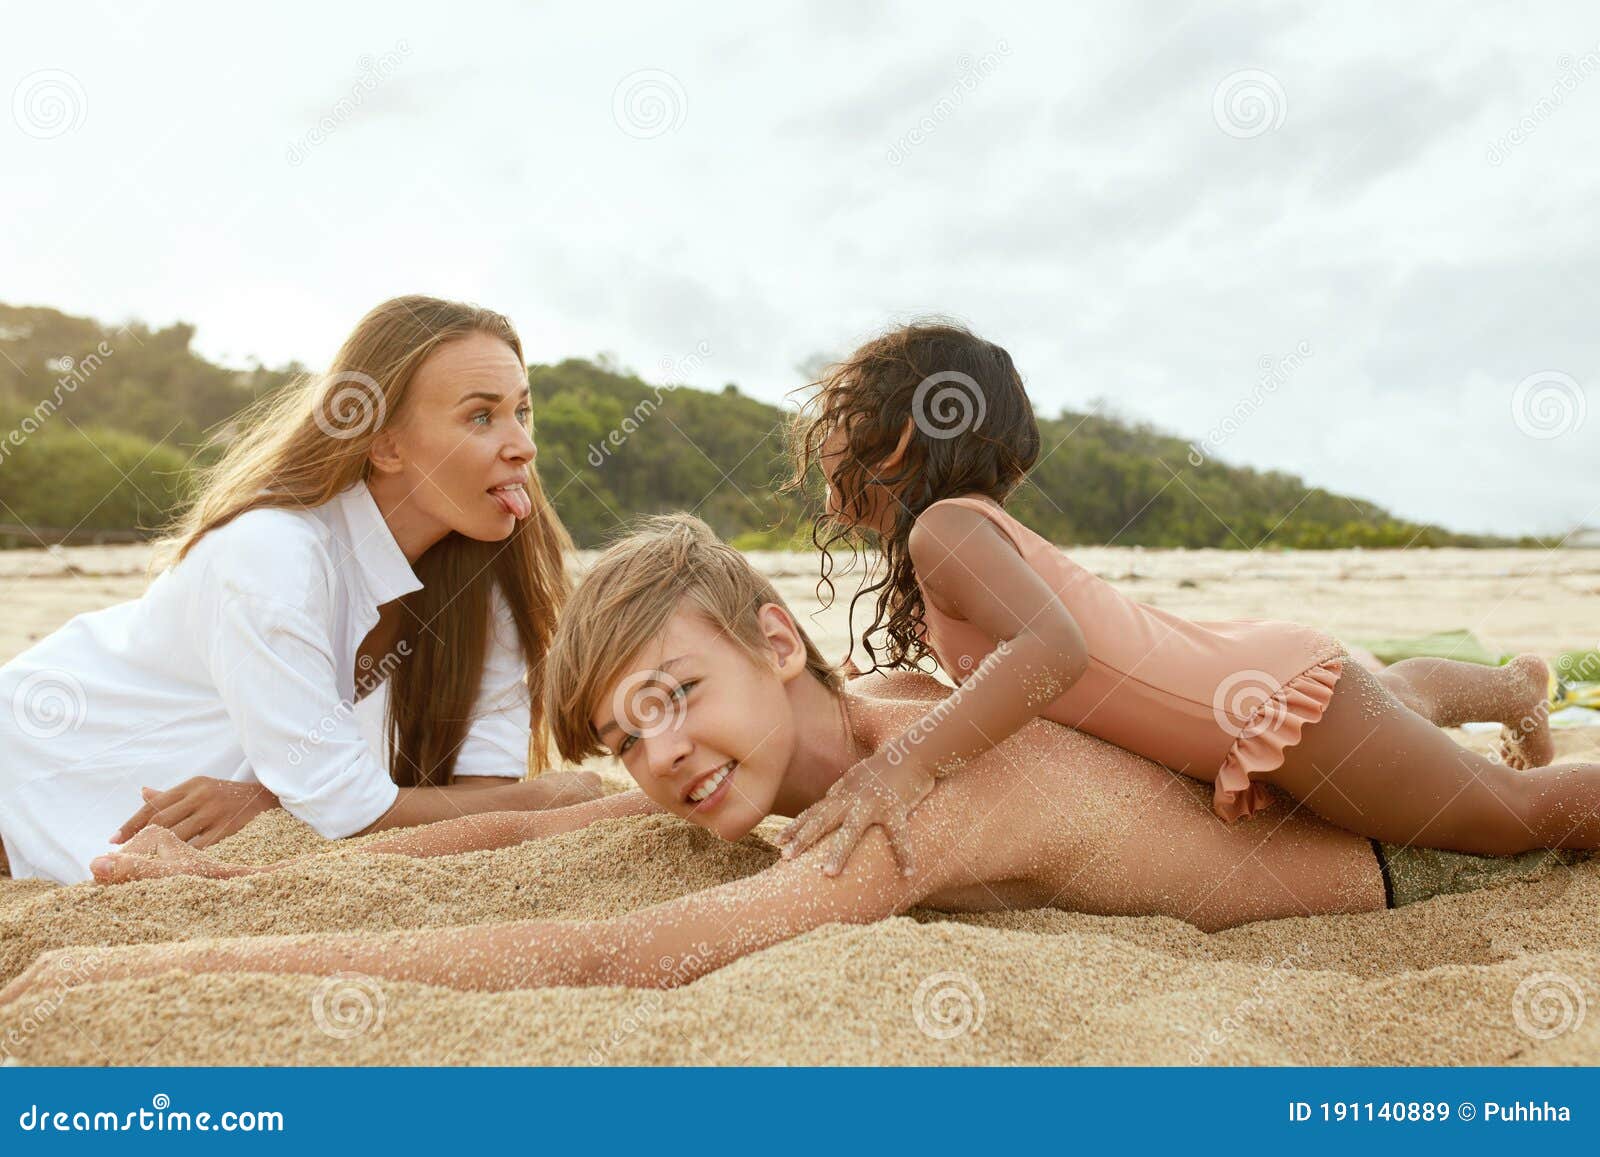 Nude beach pictures family